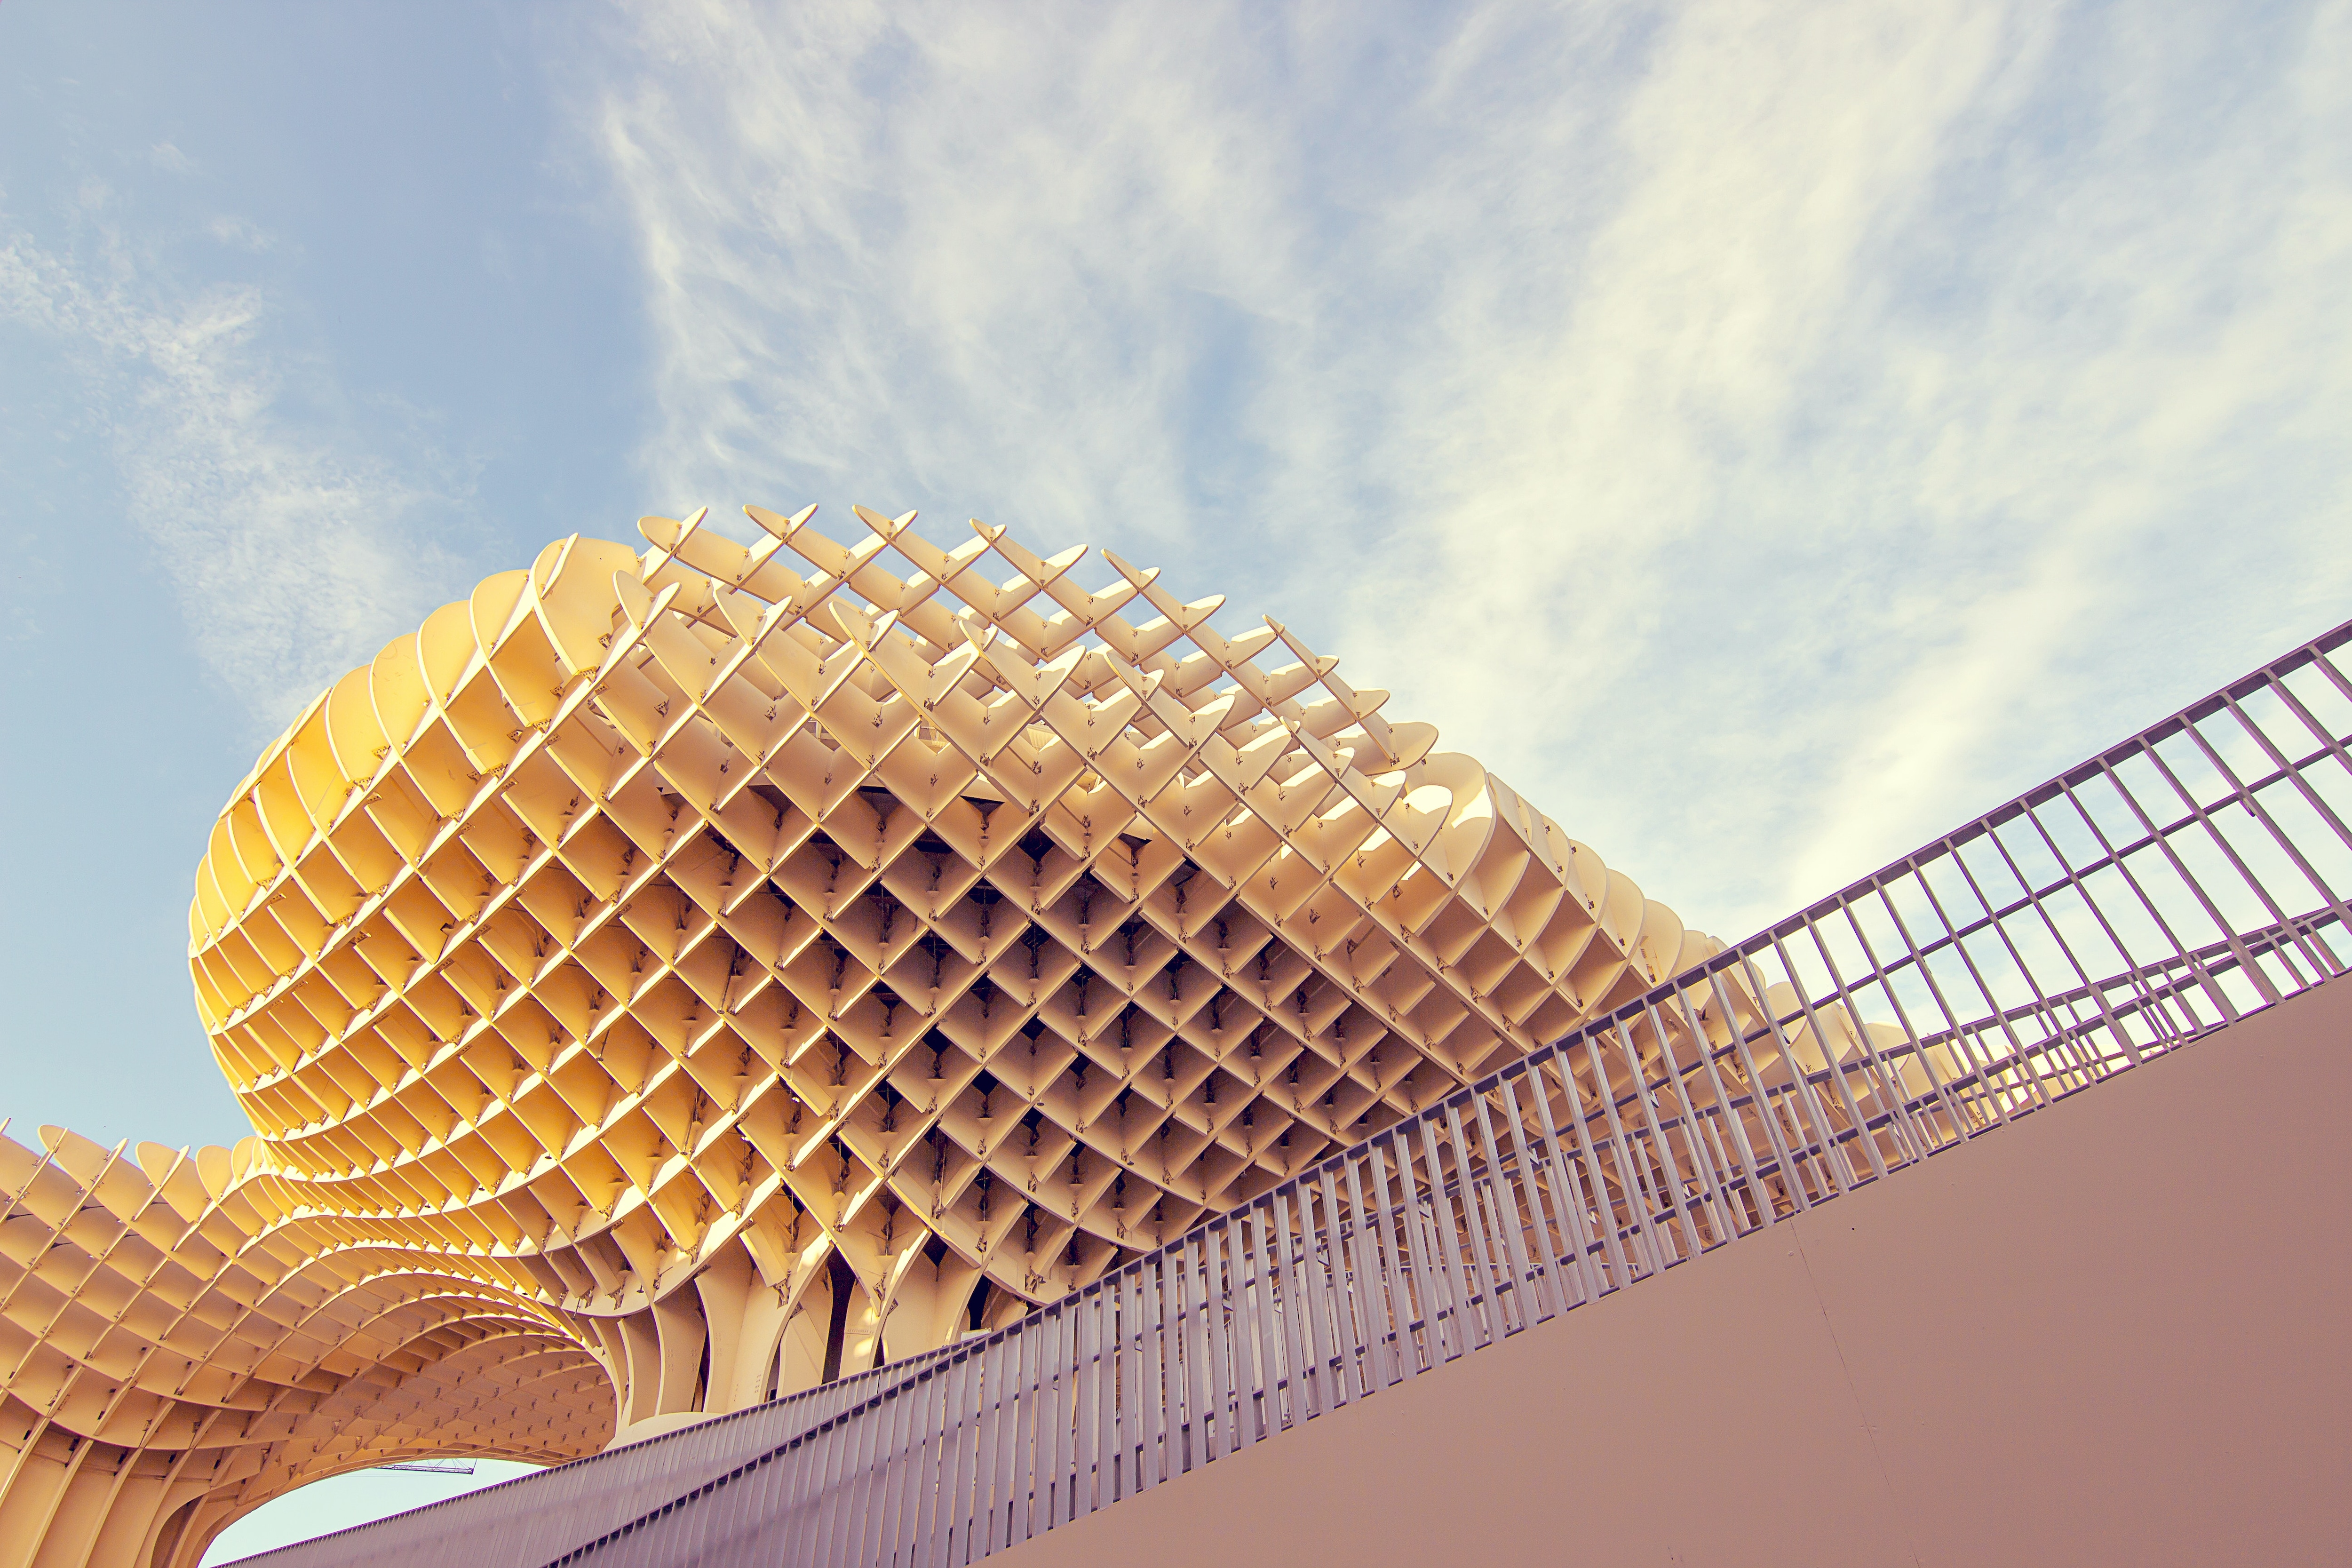 The Metropol Parasol, also known as Setas de Sevilla (Spanish for "mushrooms of Seville"), is a sizable geometric construction that resembles a network of interconnected mushrooms.(pexels )